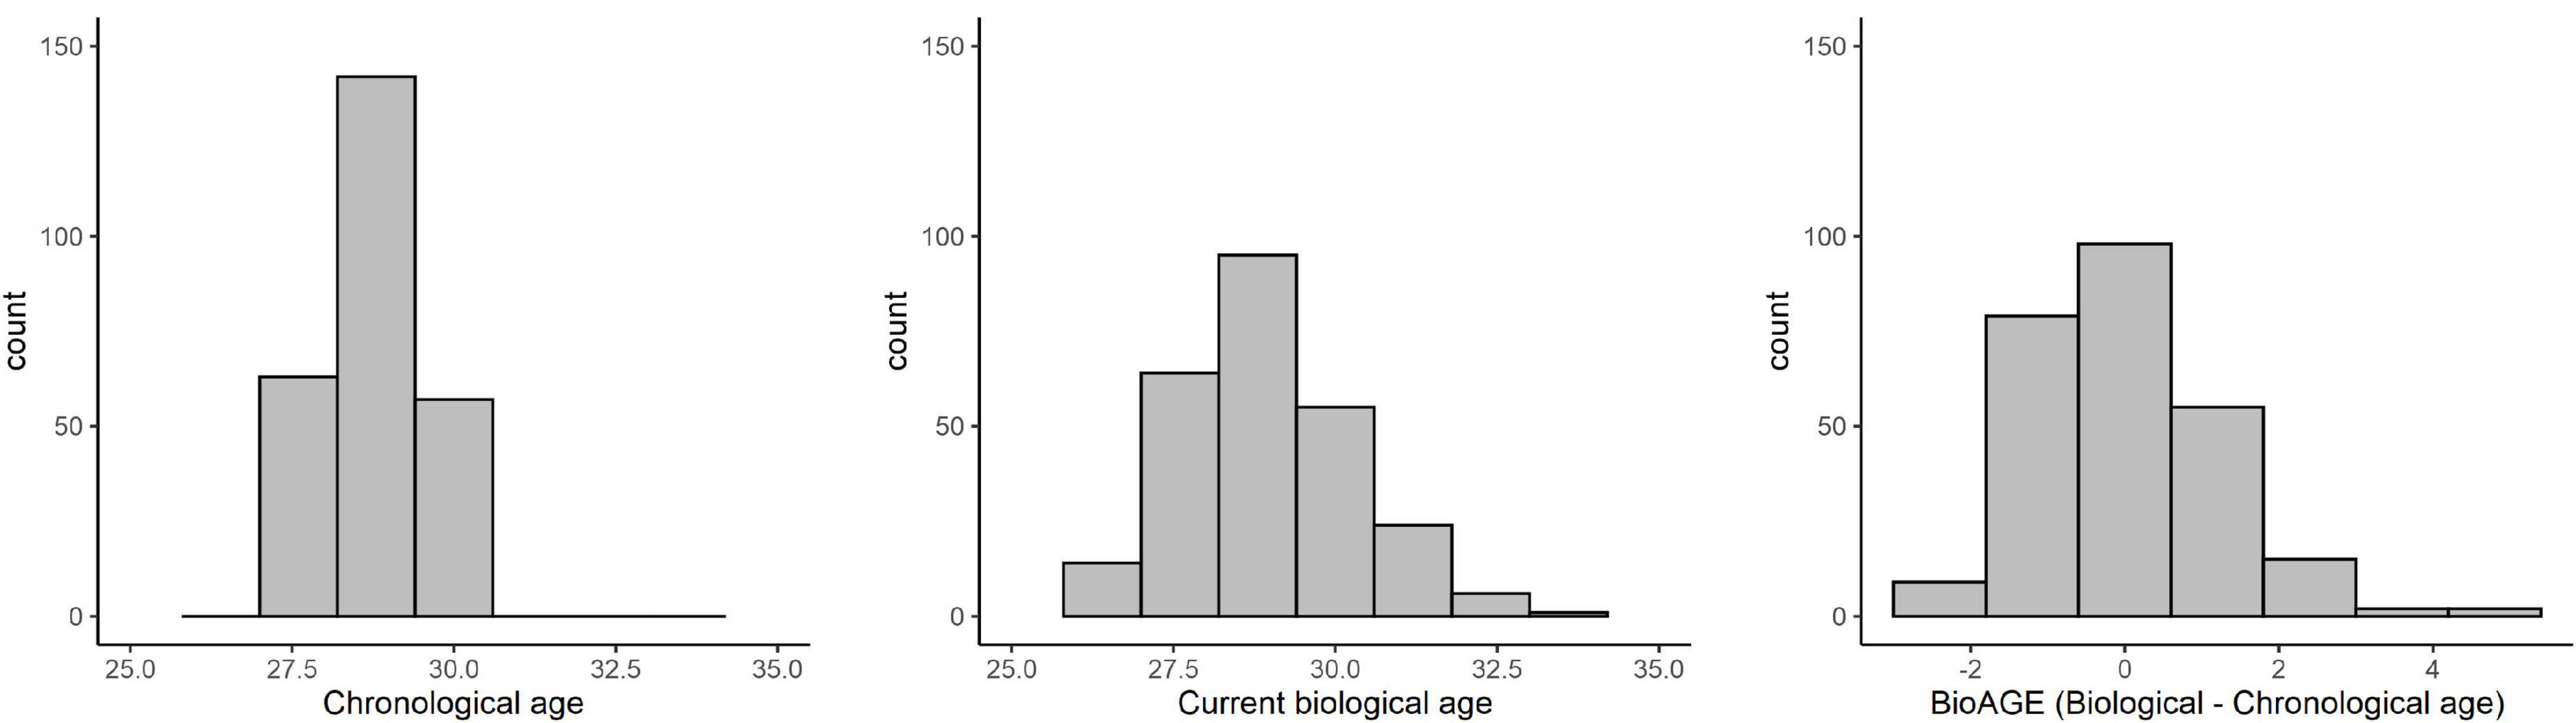 Birth outcomes, puberty onset, and obesity as long-term predictors of <mark class="highlighted">biological aging</mark> in young adulthood